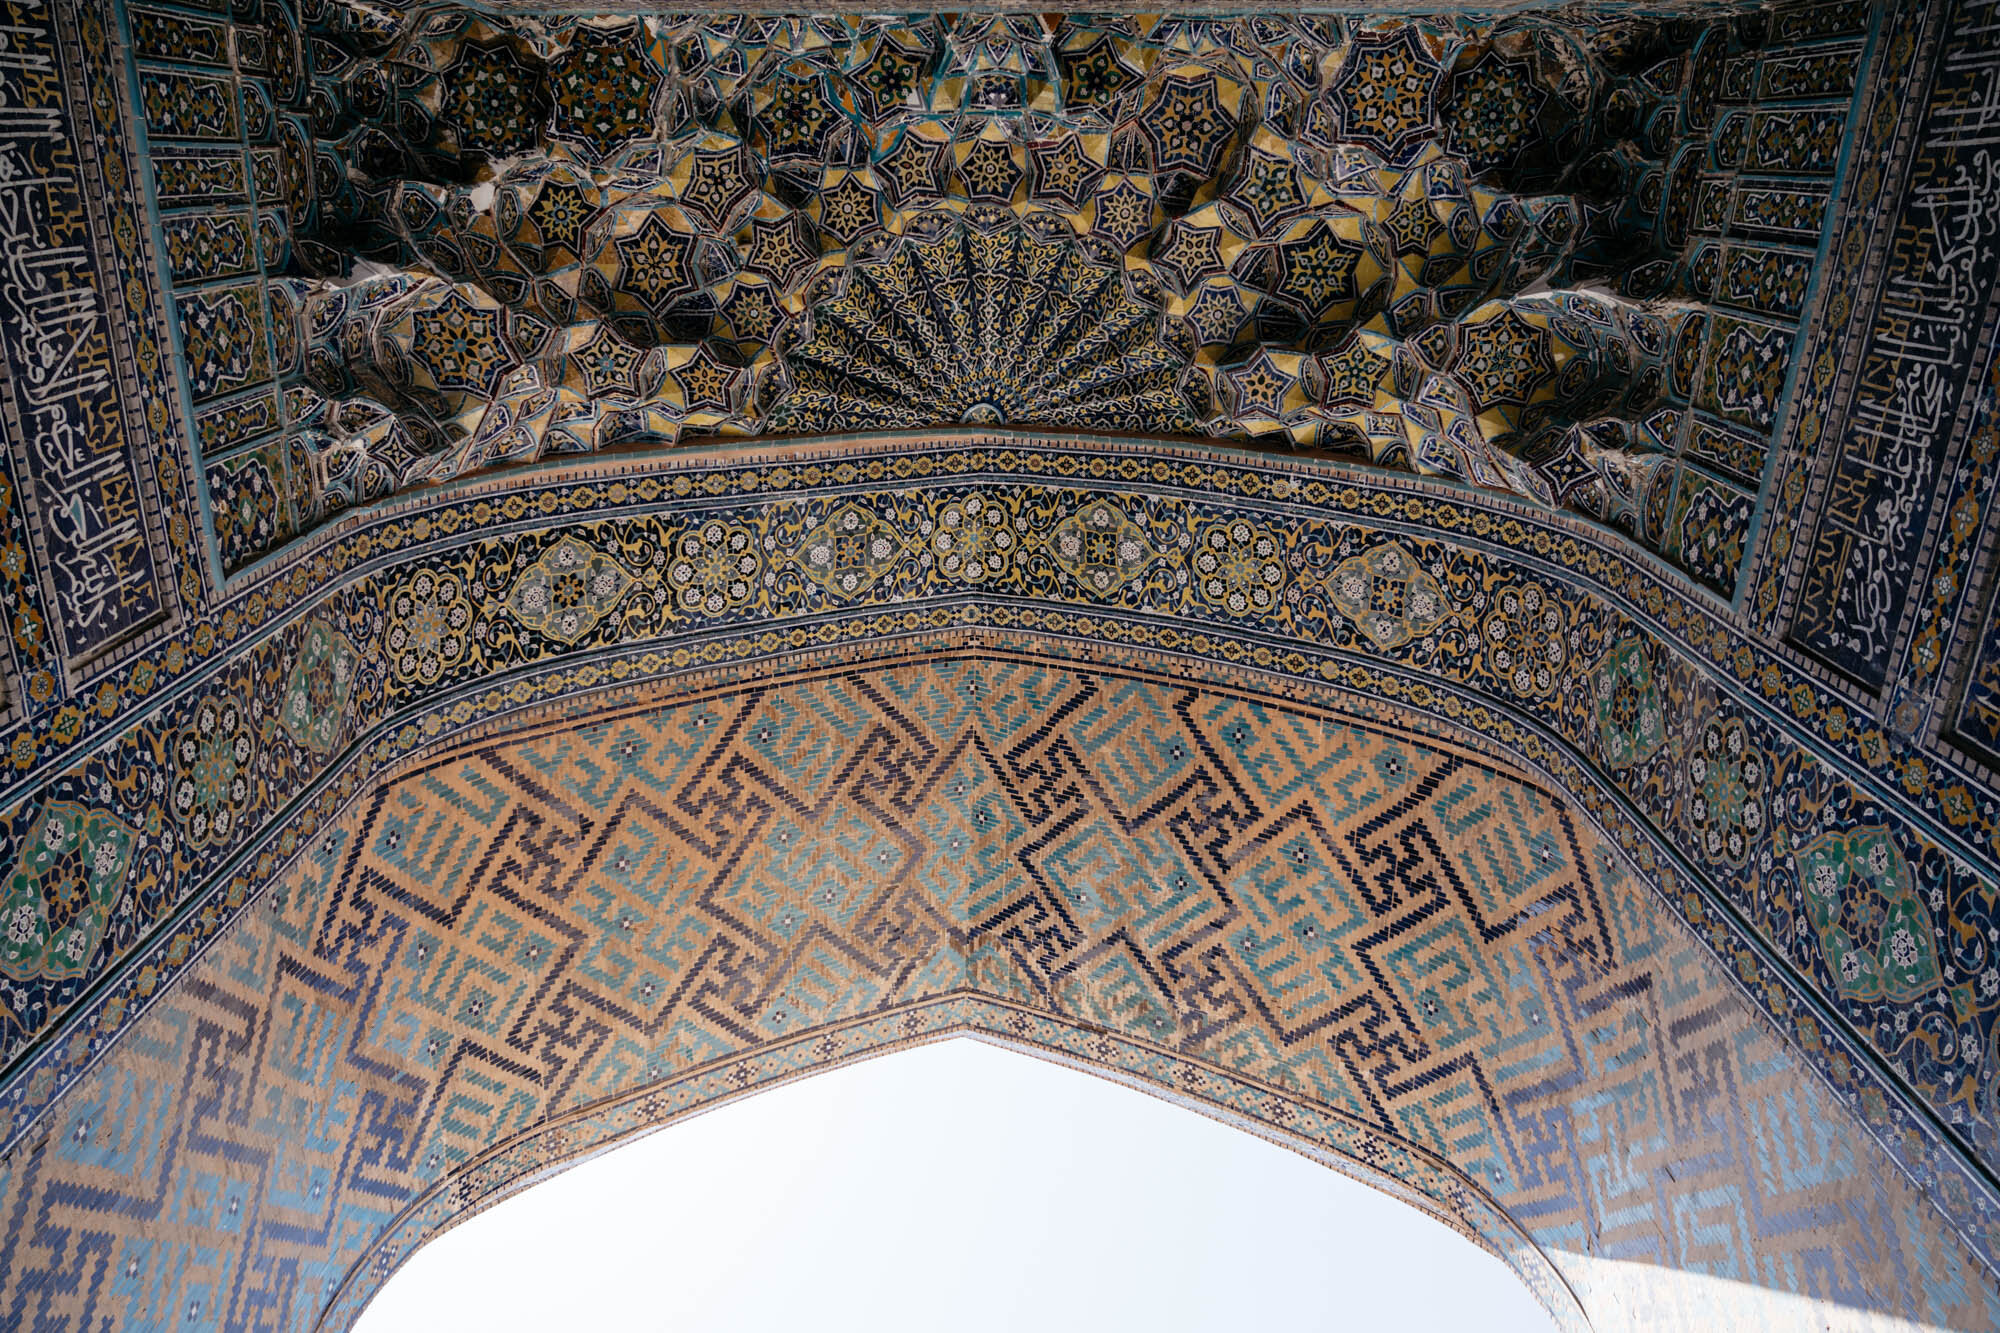  Ceiling details from the Sher-Dor Madrasah, Samarkand 